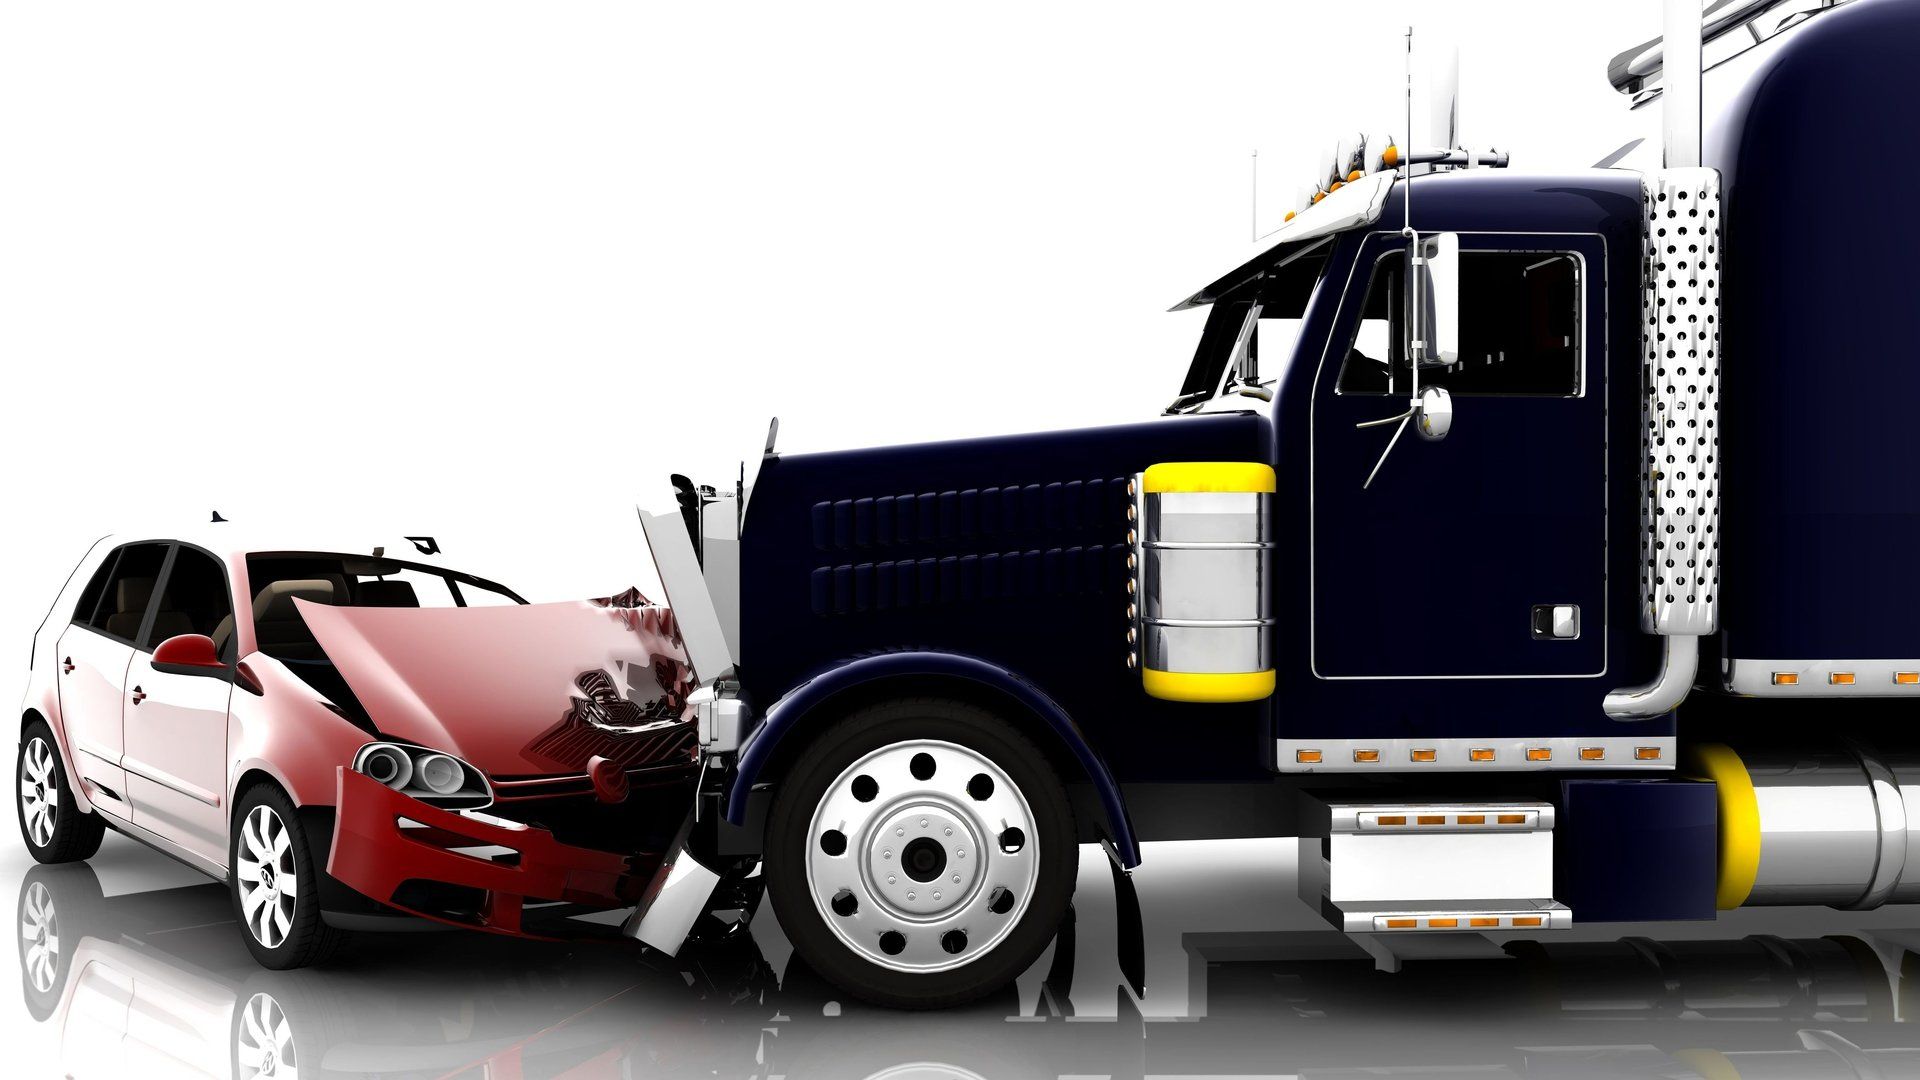 Truck Accident Injuries and Fatalities